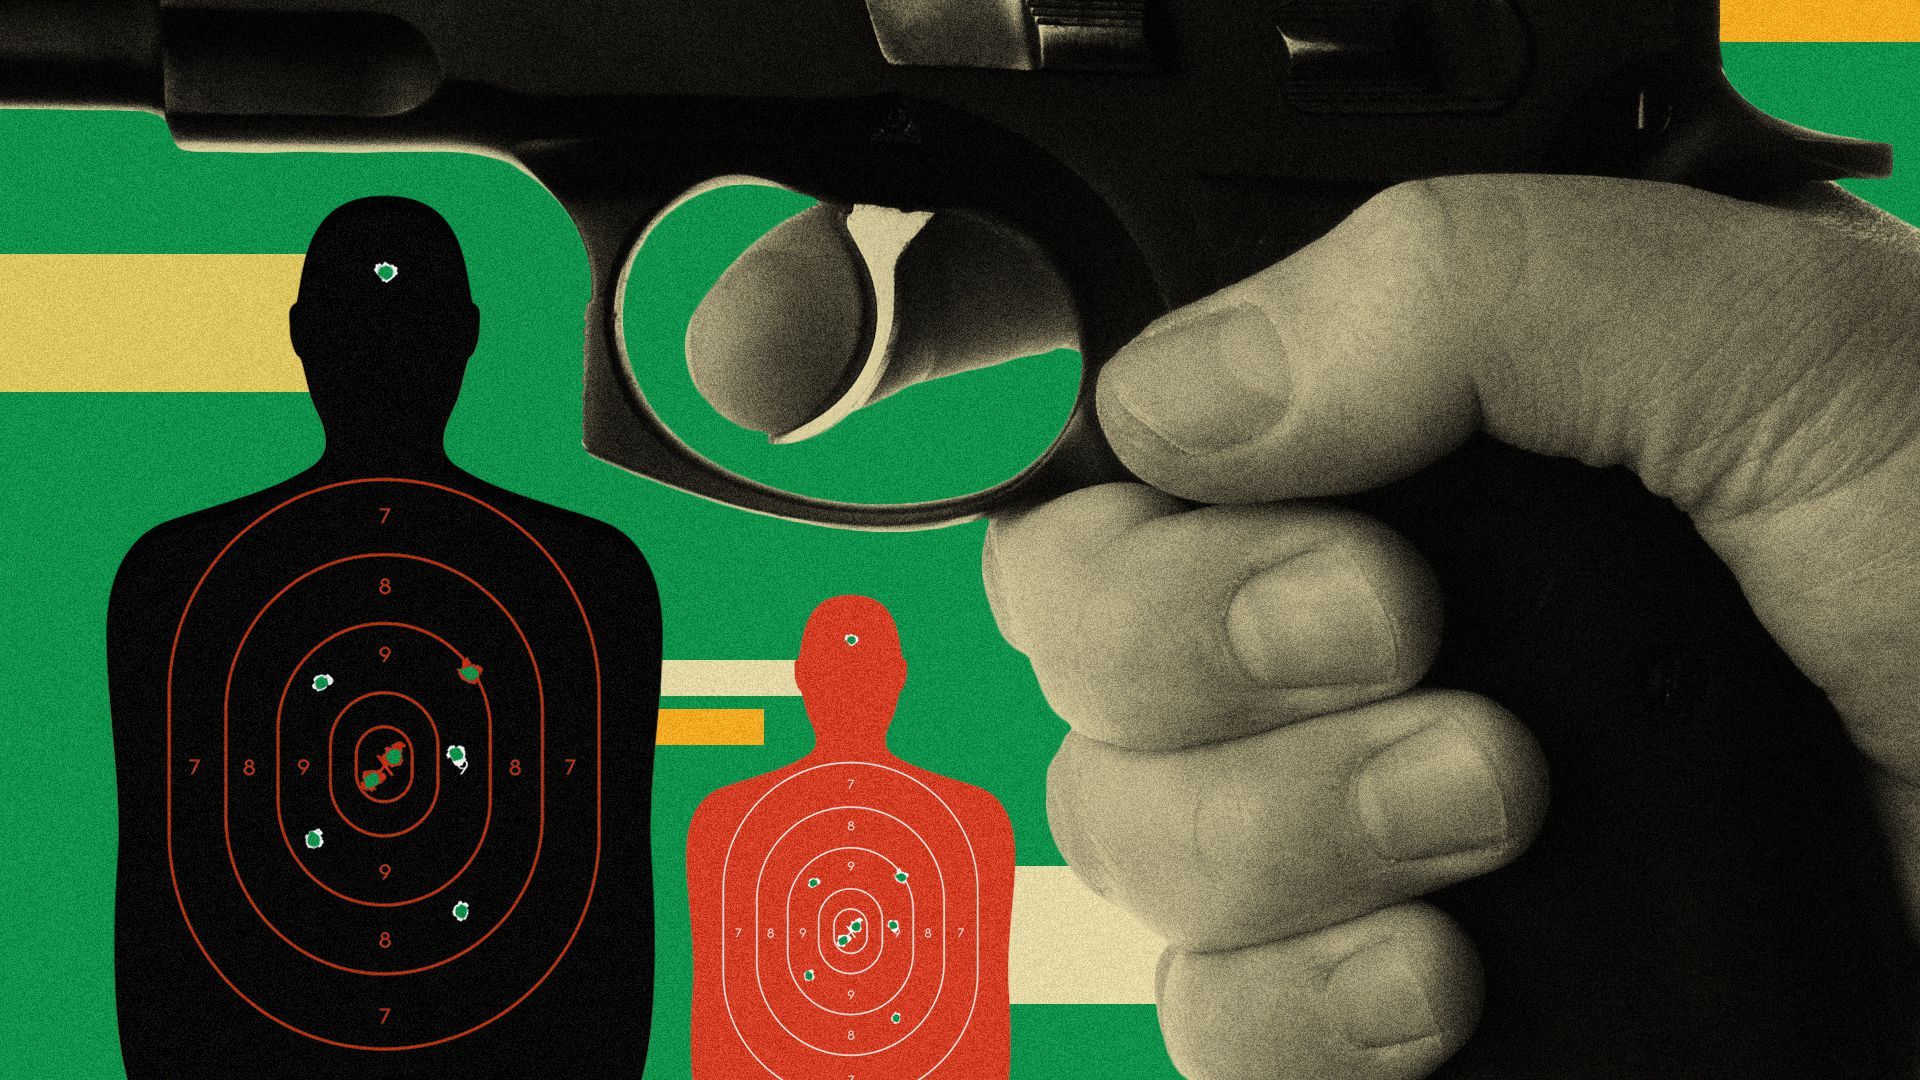 Illustrated collage of targets and a hand holding a gun.